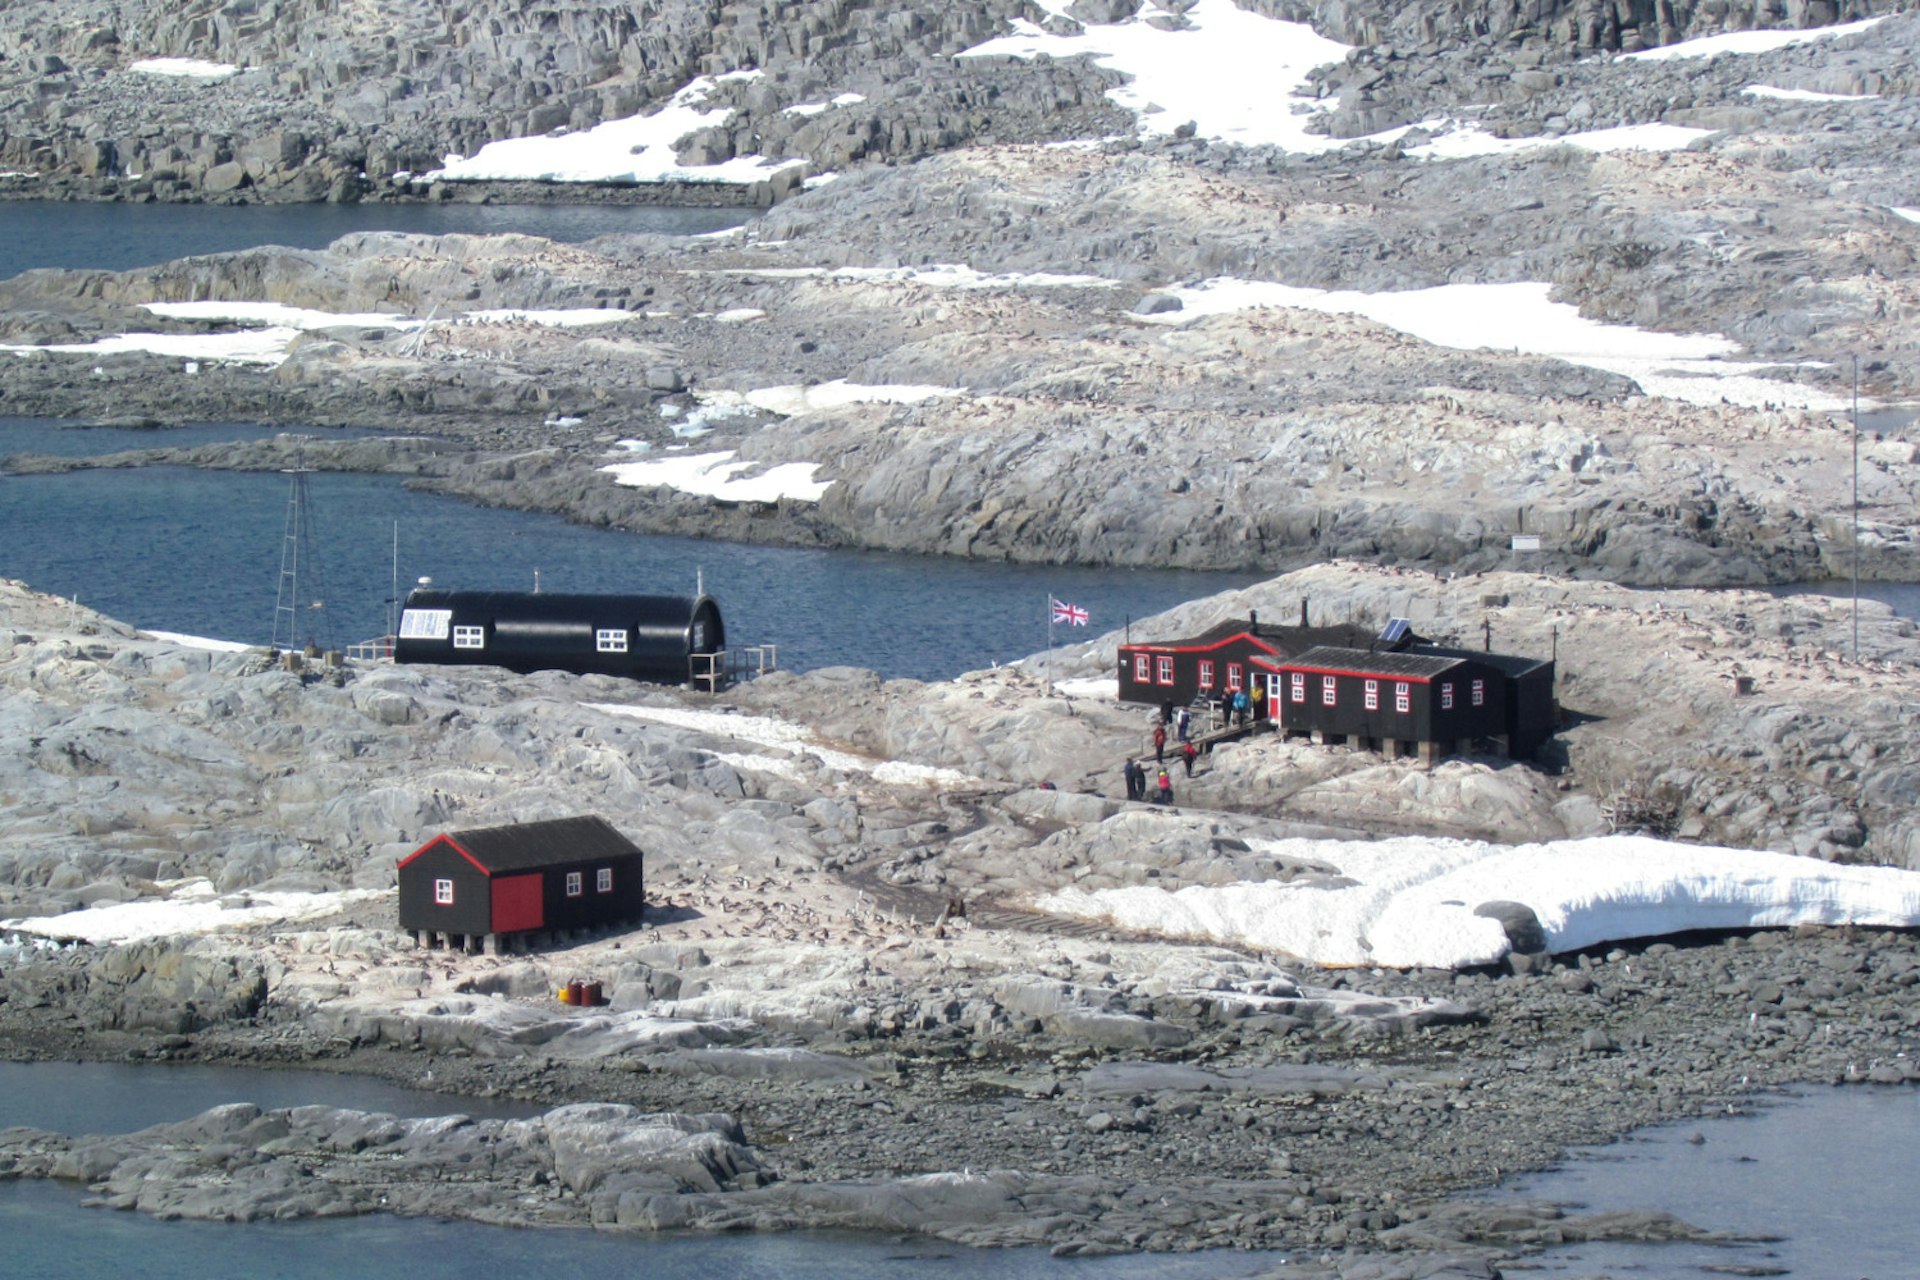 About as remote as it gets, Goudier Island, Port Lockroy © UKAHT 